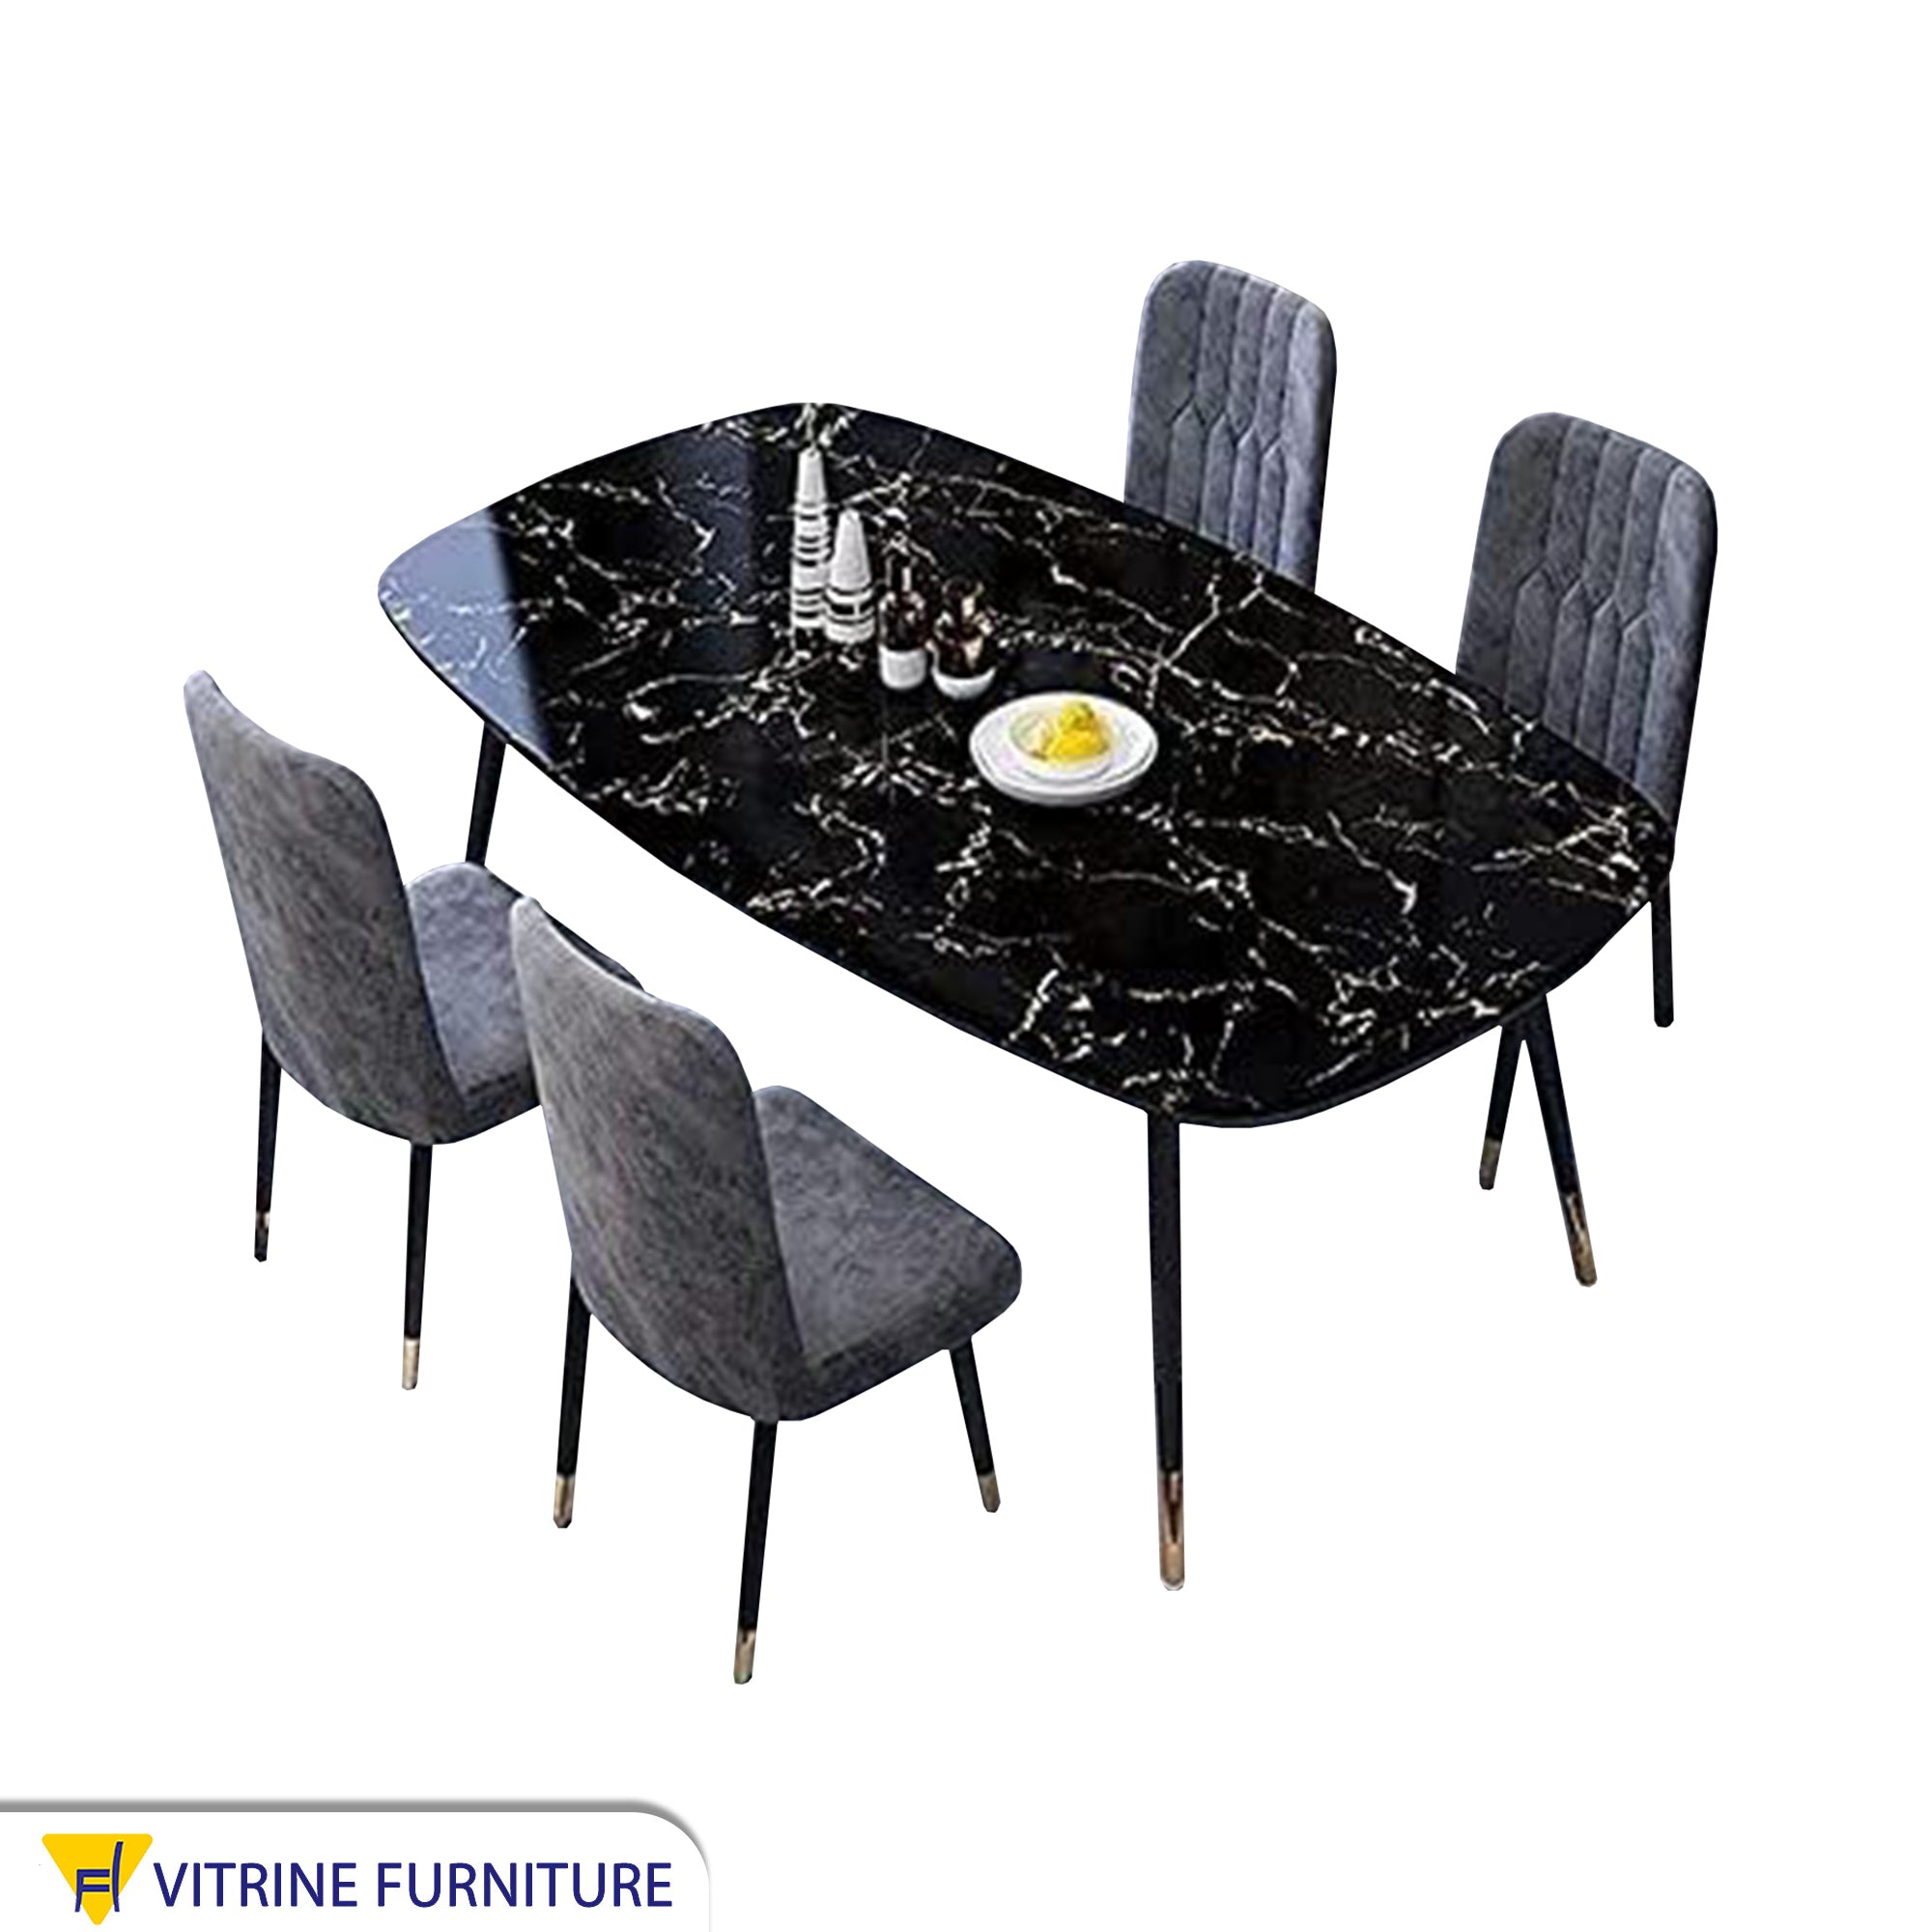 Black dining table decorated with white